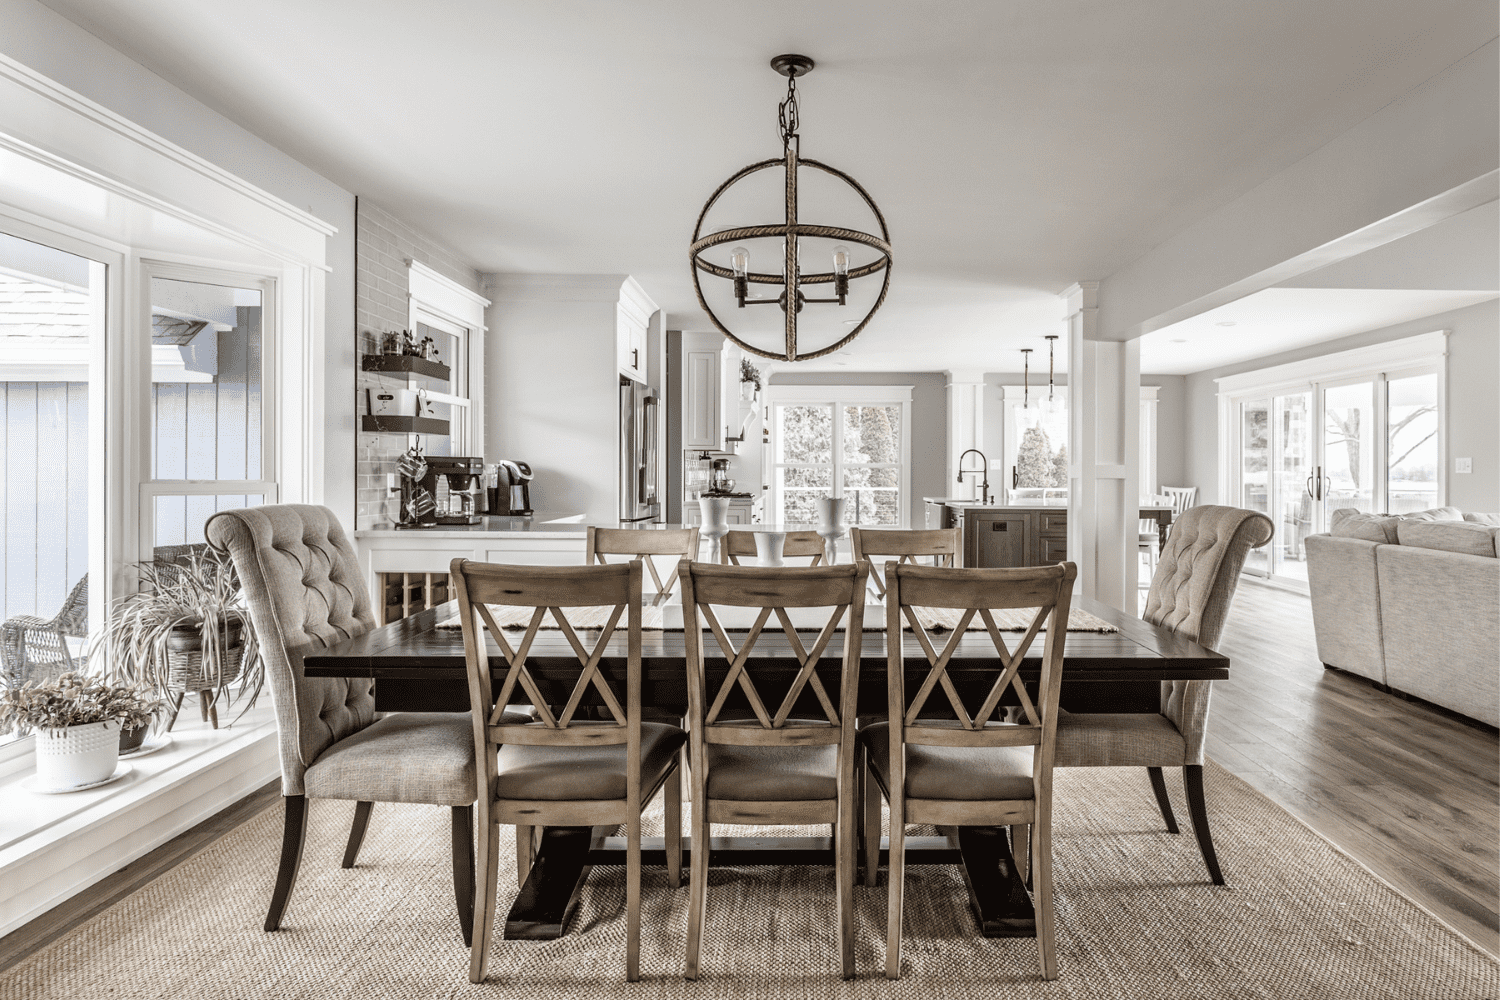 Nicholas Design Build | A dining room with a large table and chairs.